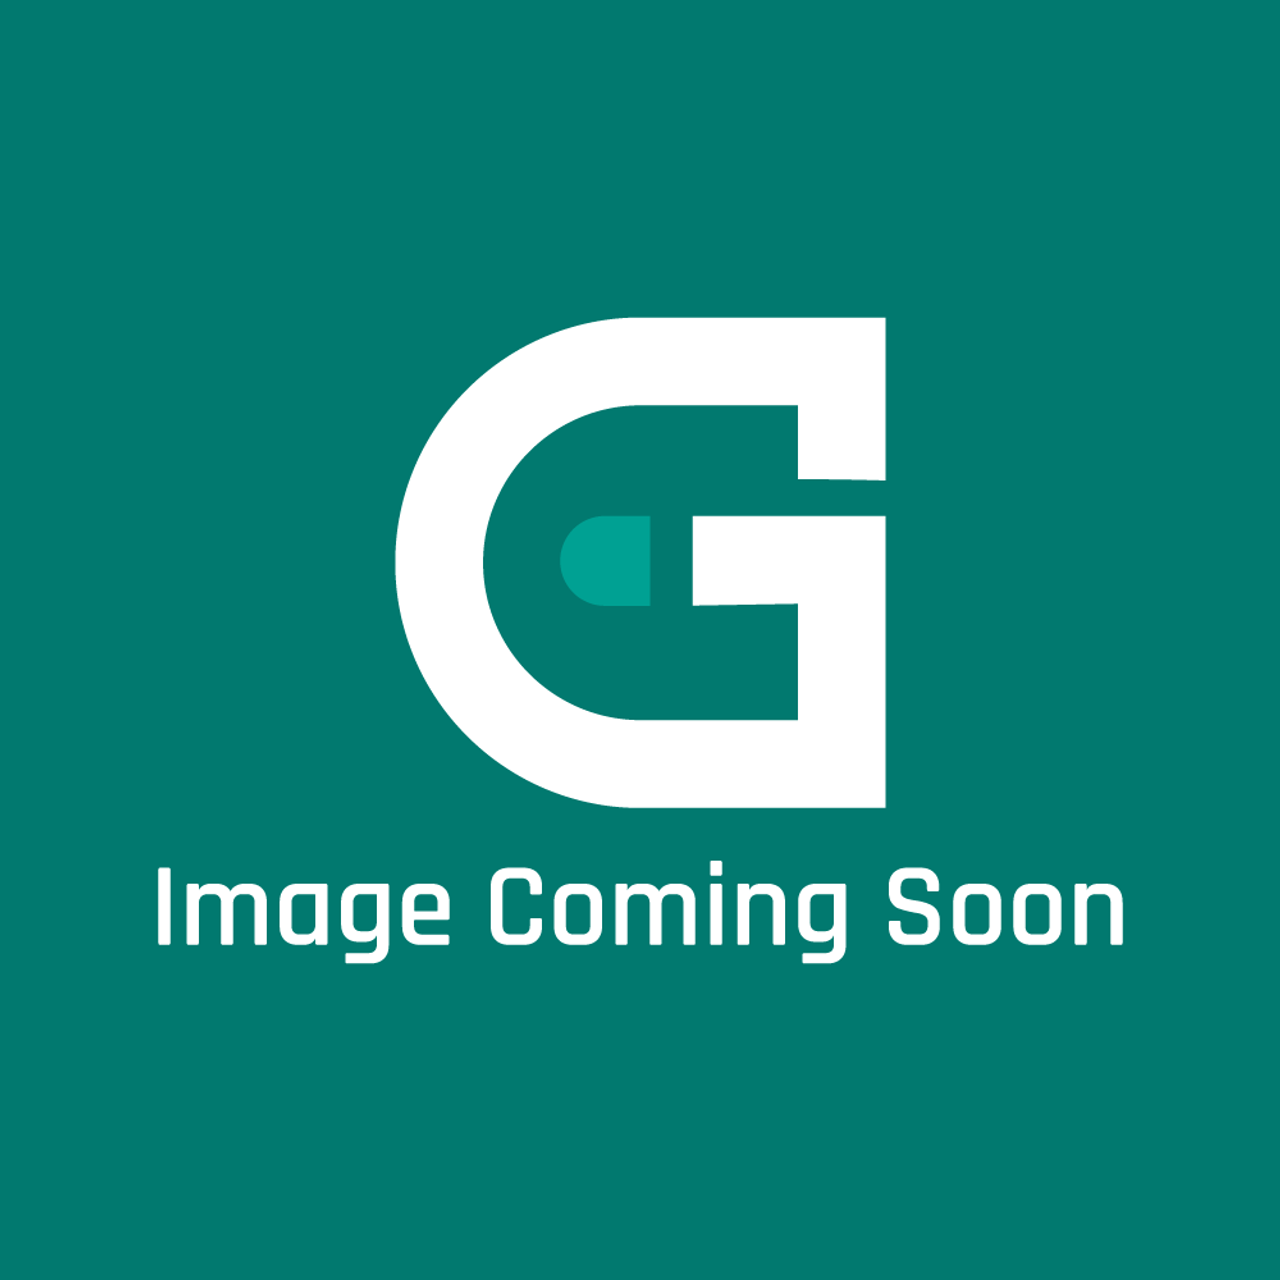 LG 1TTL0403518 - Screw,Tapping - Image Coming Soon!